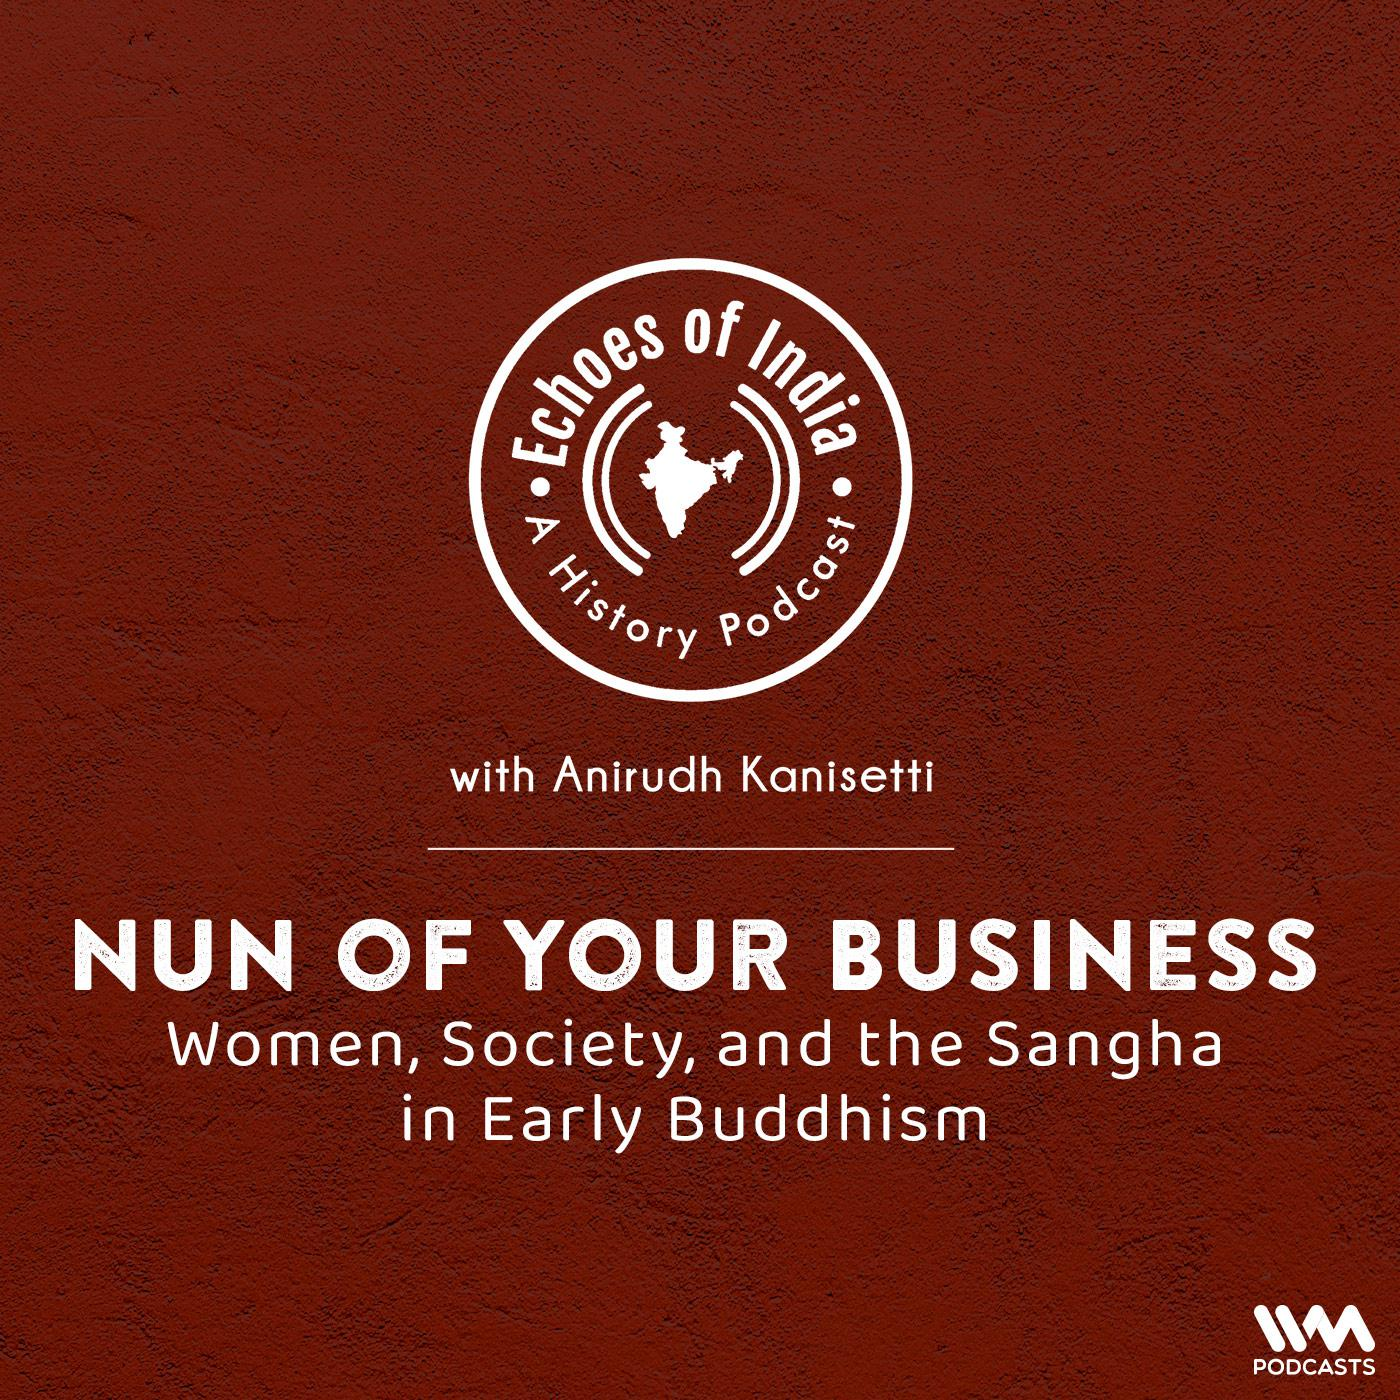 Nun of Your Business: Women, Society, and the Sangha in Early Buddhism